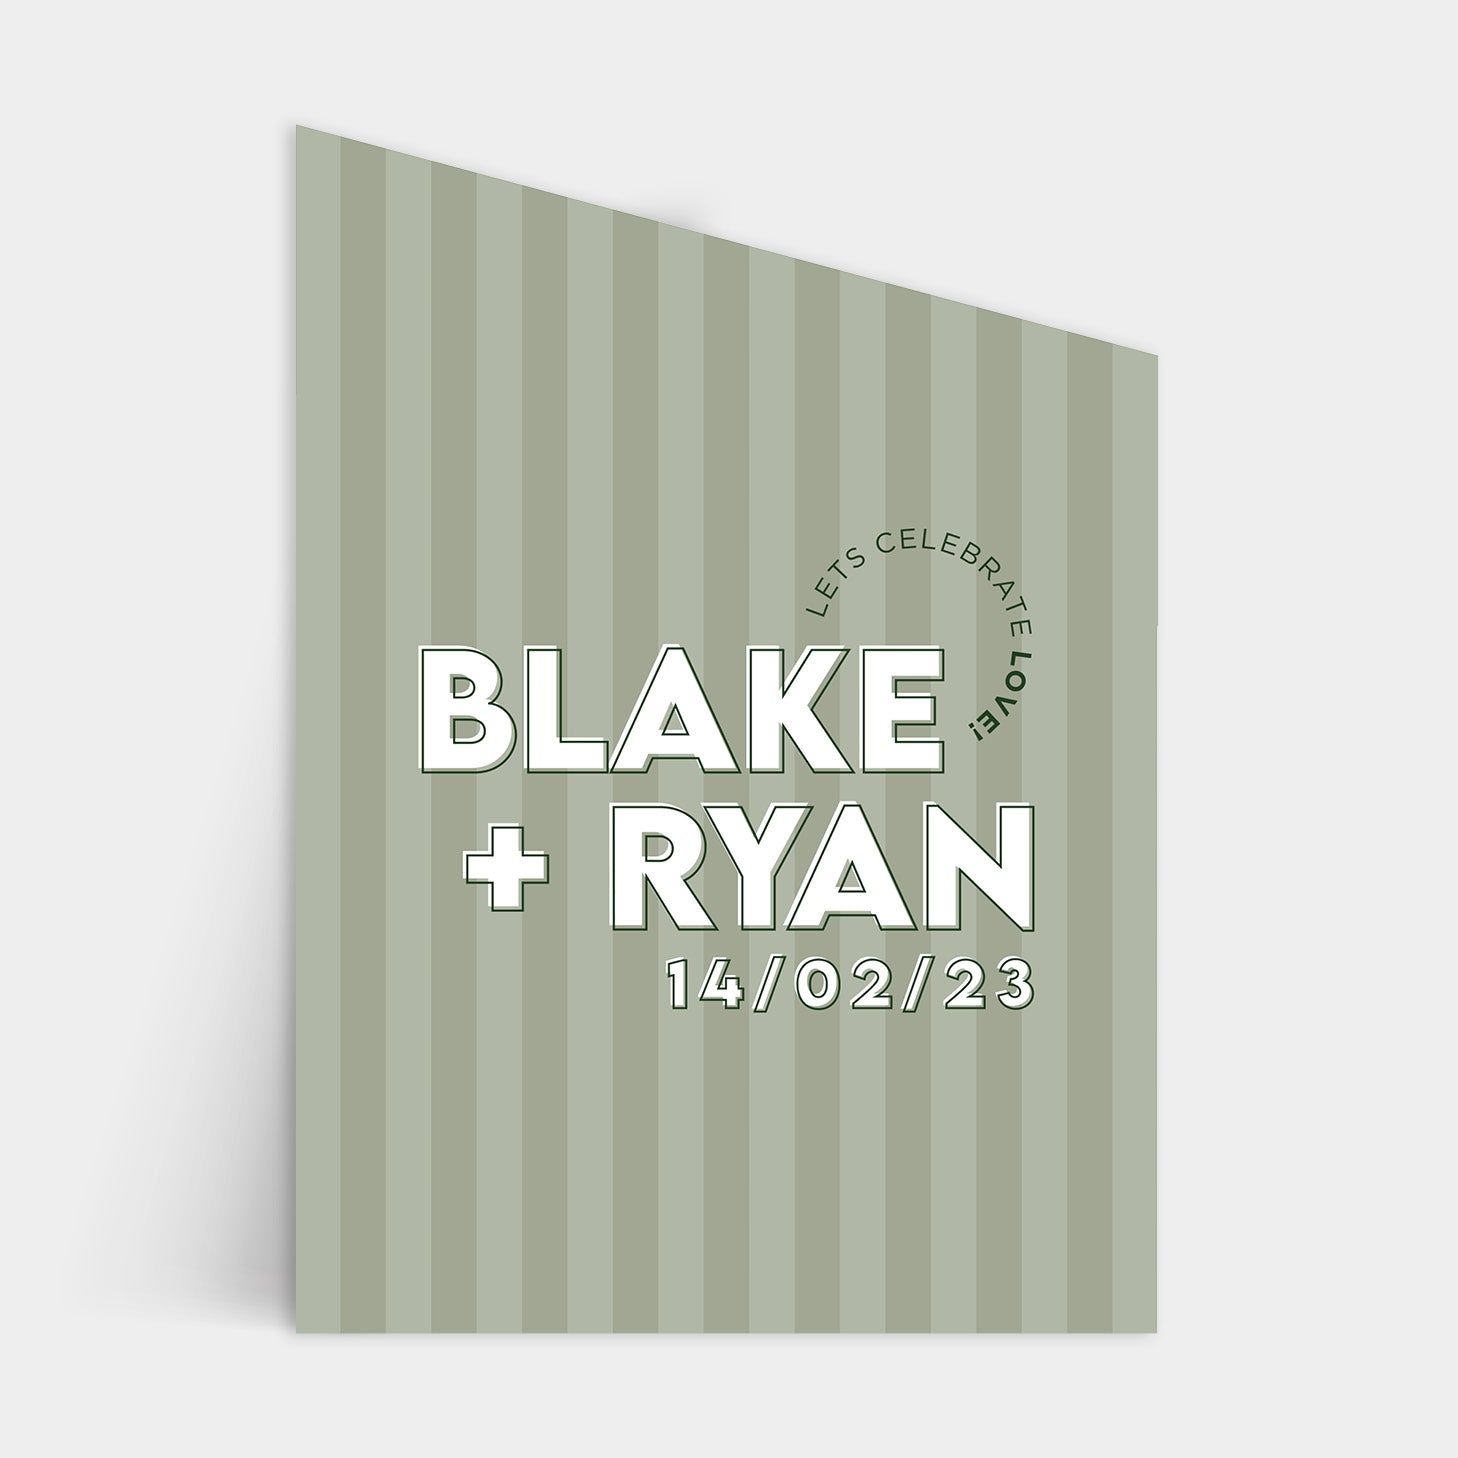 BLAKE DUO SIGN PACKAGE